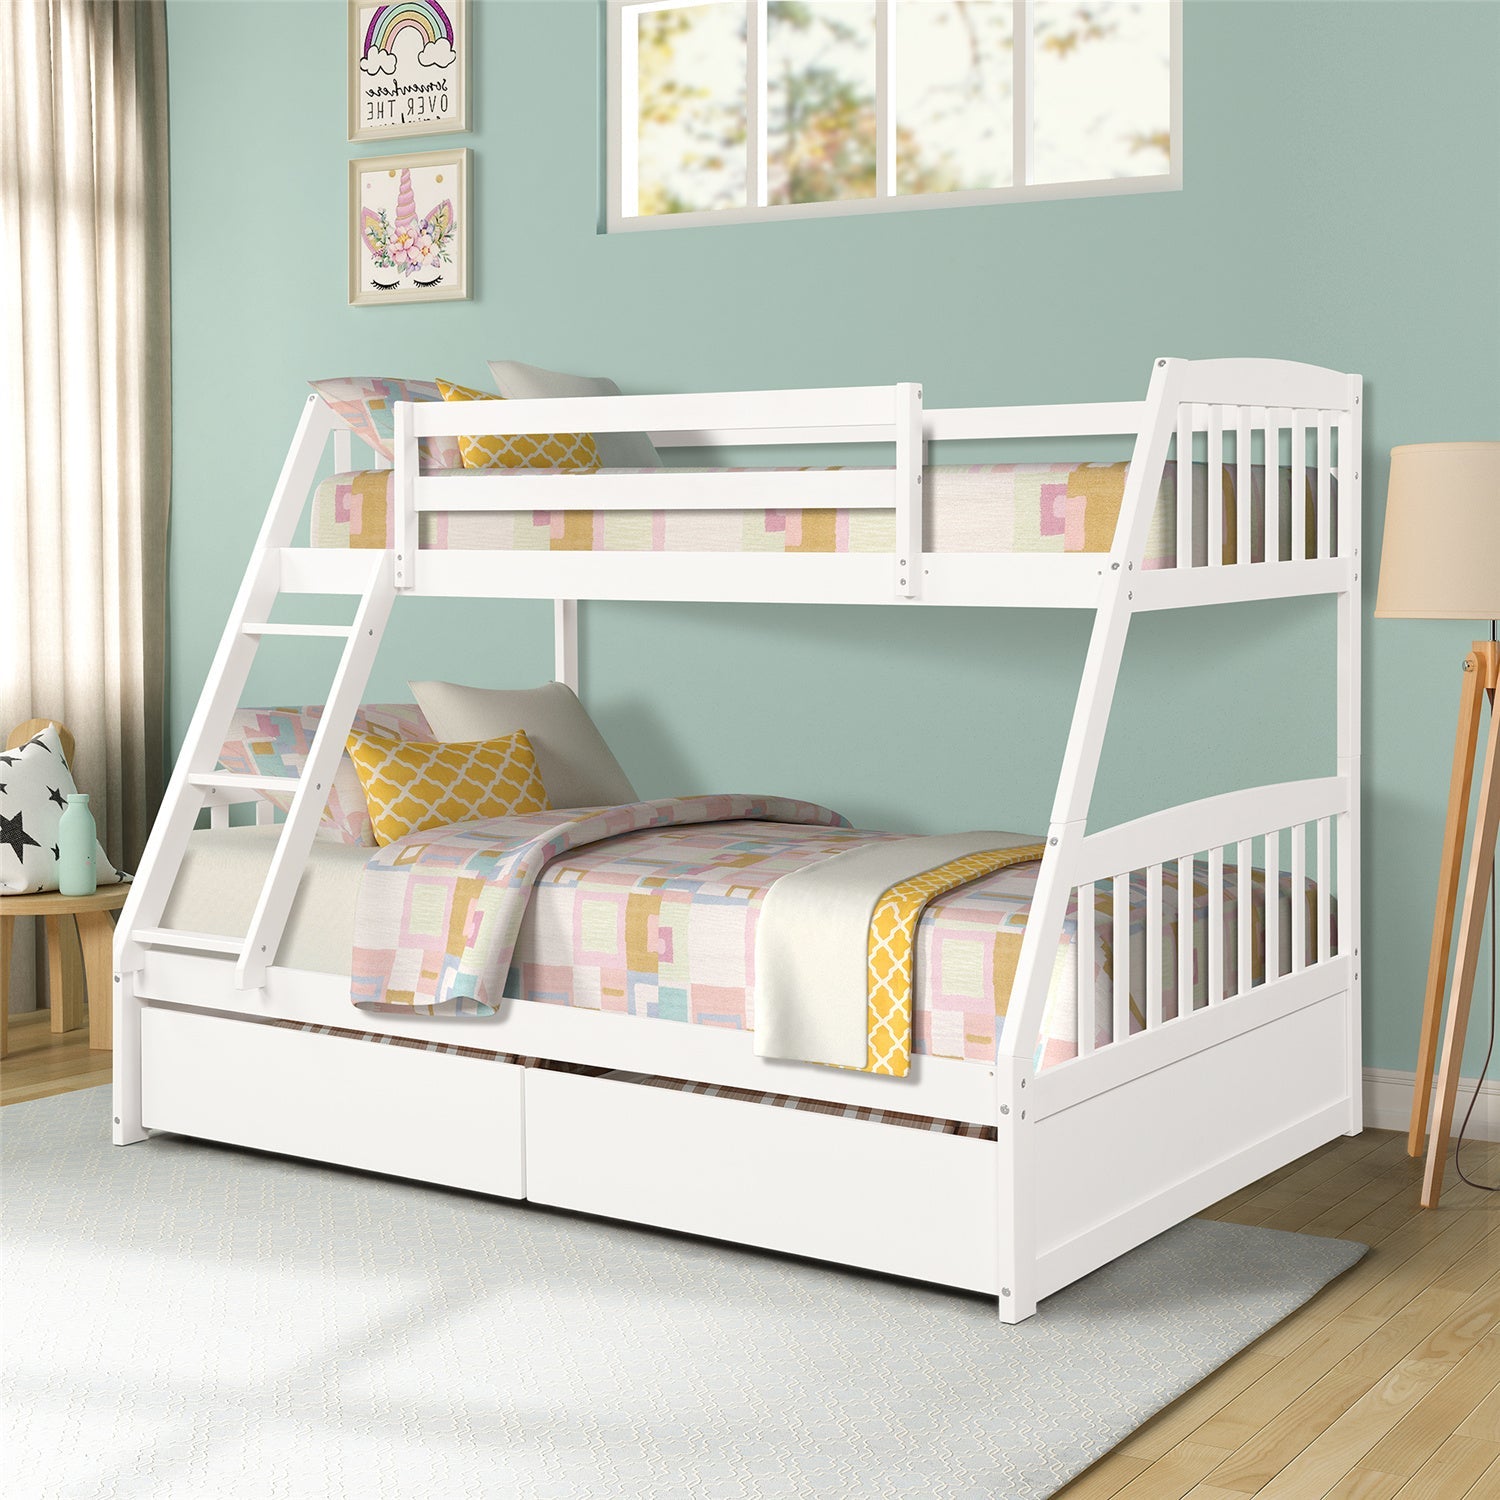 Twin Over Full Bunk Bed with Two Storage Drawers, Pinewood Bed Frame and Ladder with Guard Rails for Toddlers, Kids, Teens, Boys and Girls, White